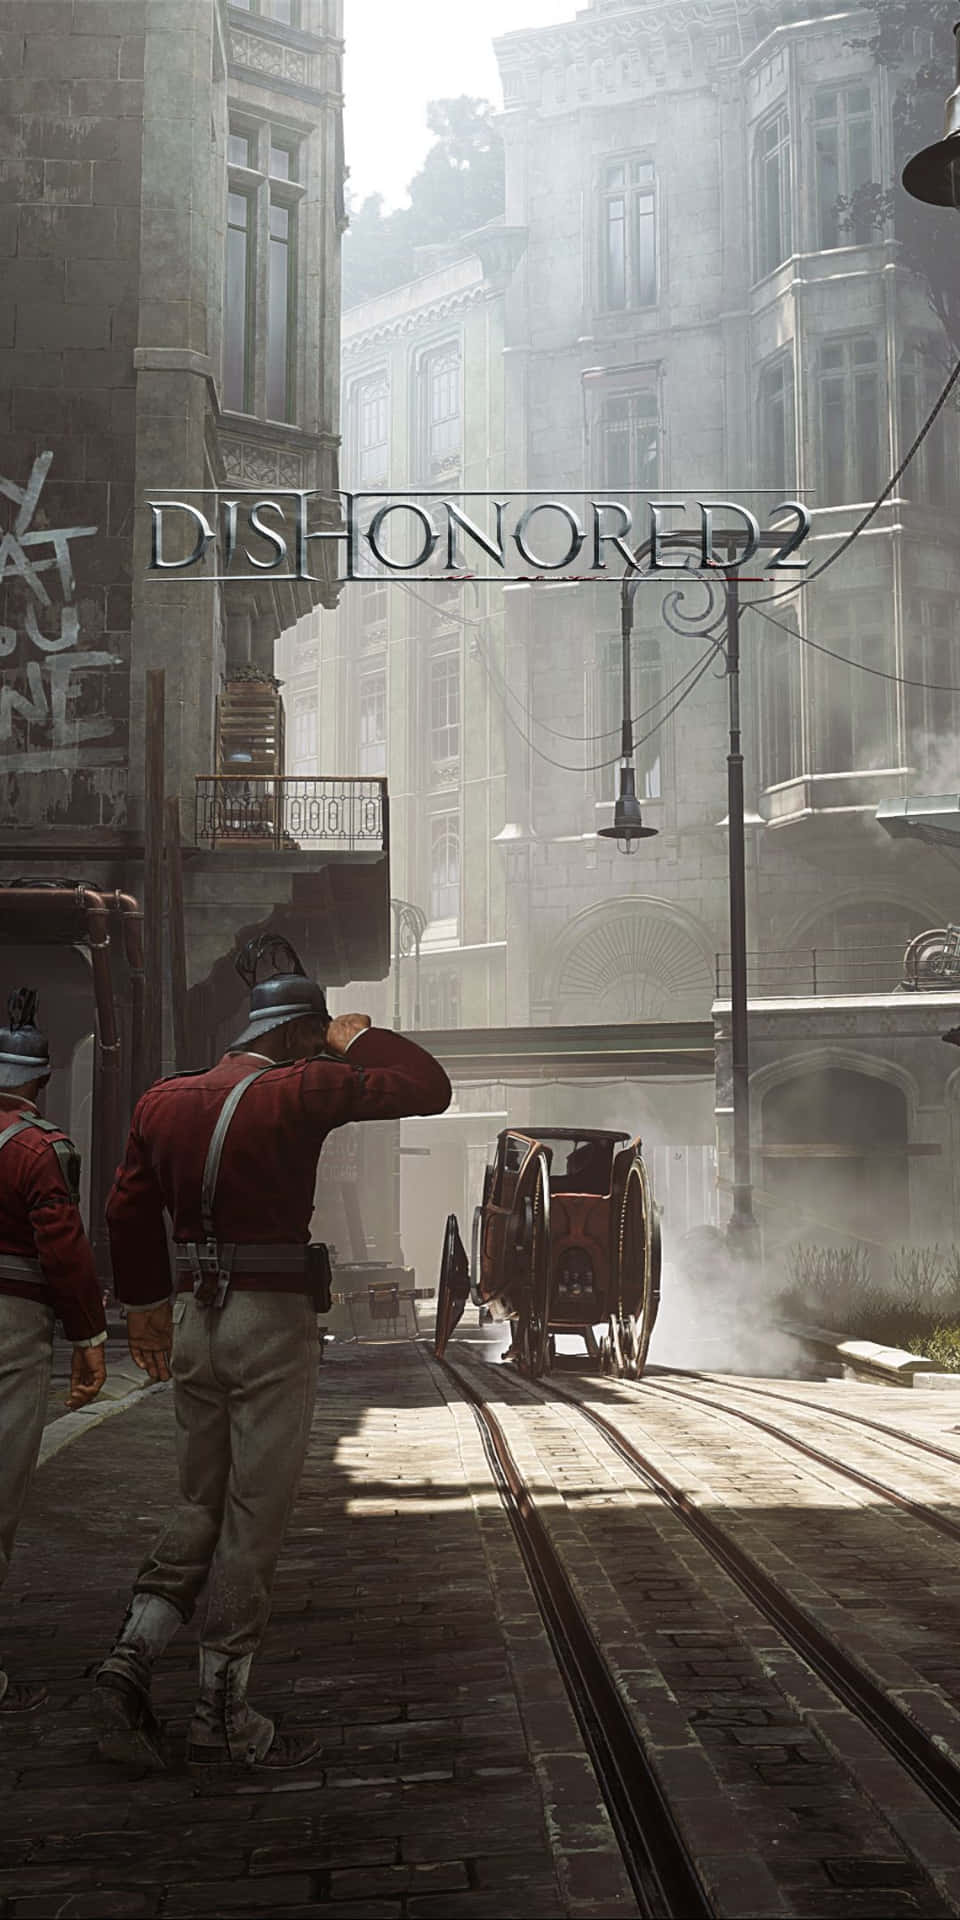 Discover Dishonored 2 on the Pixel 3!